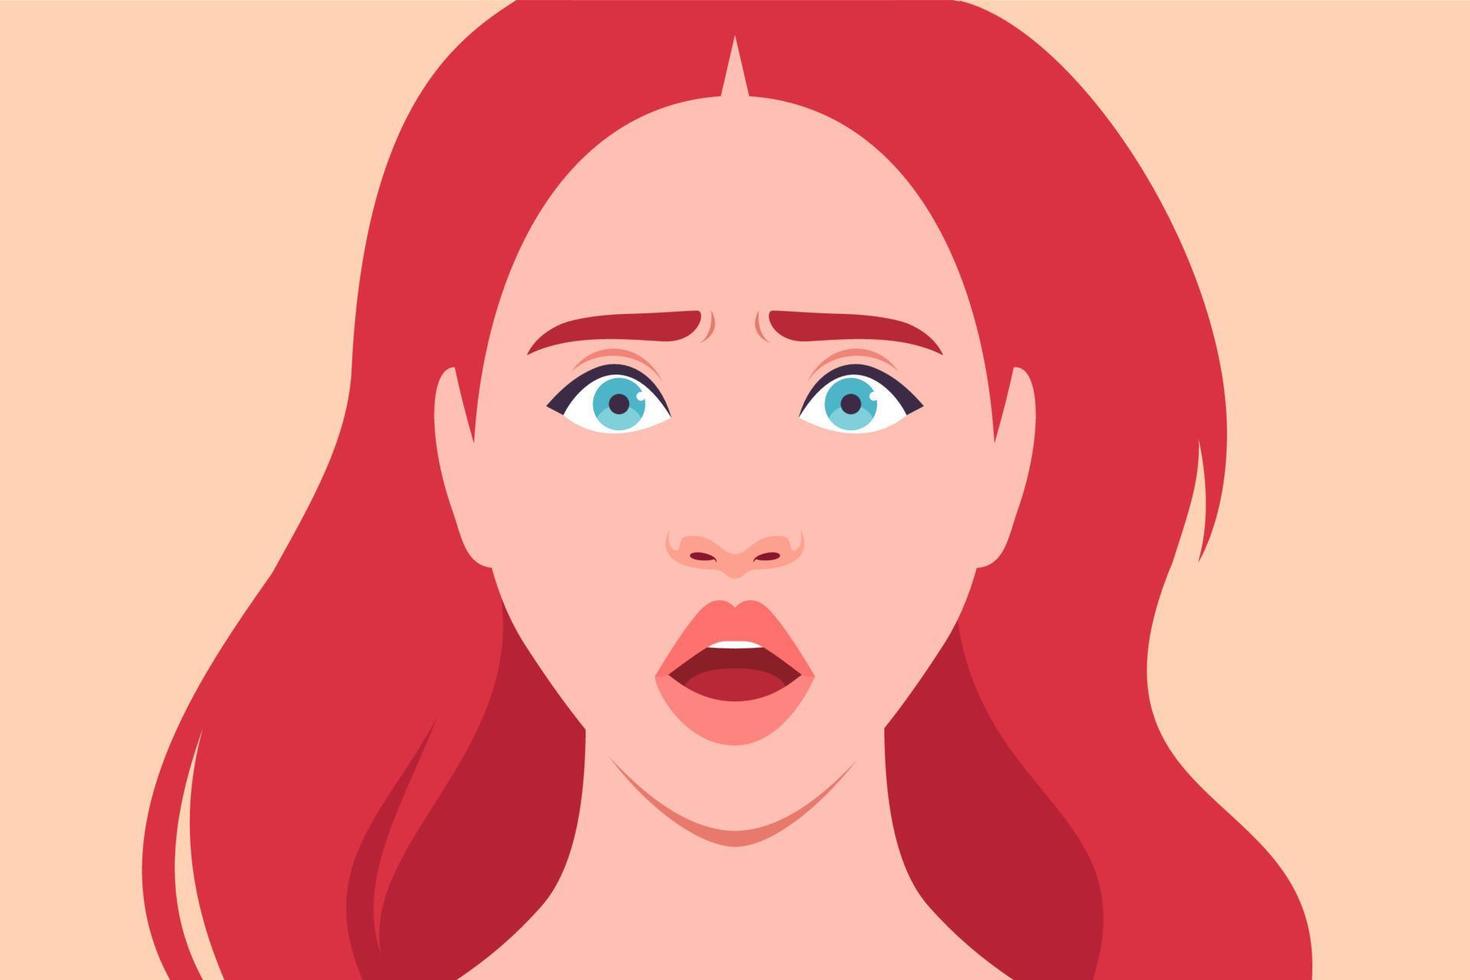 The face of a frightened redhead woman vector